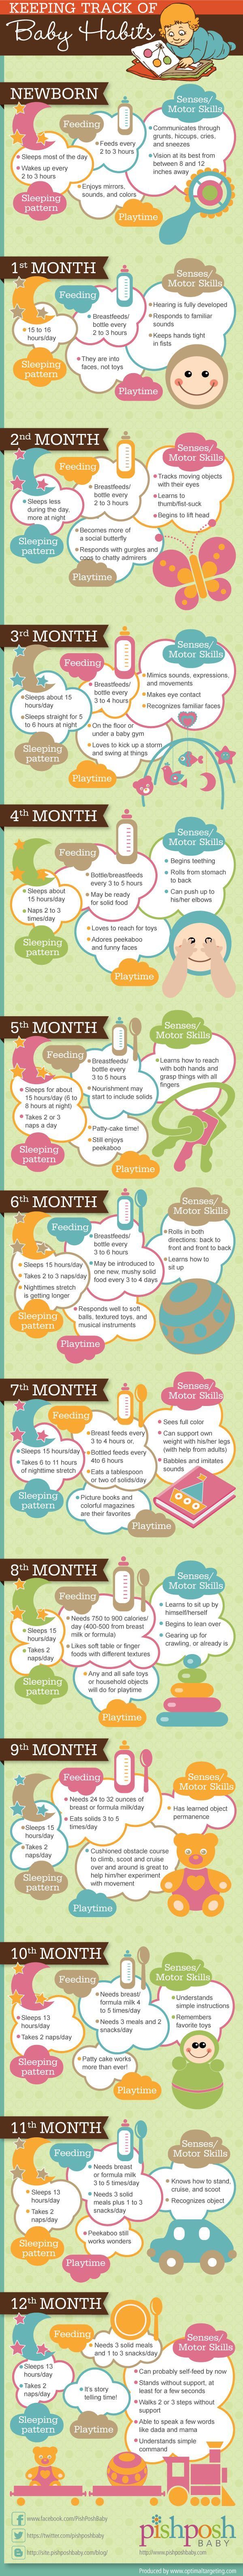 Keeping Track of Baby Habits [infographic] – everything you ever wanted to know about your babys development during the first